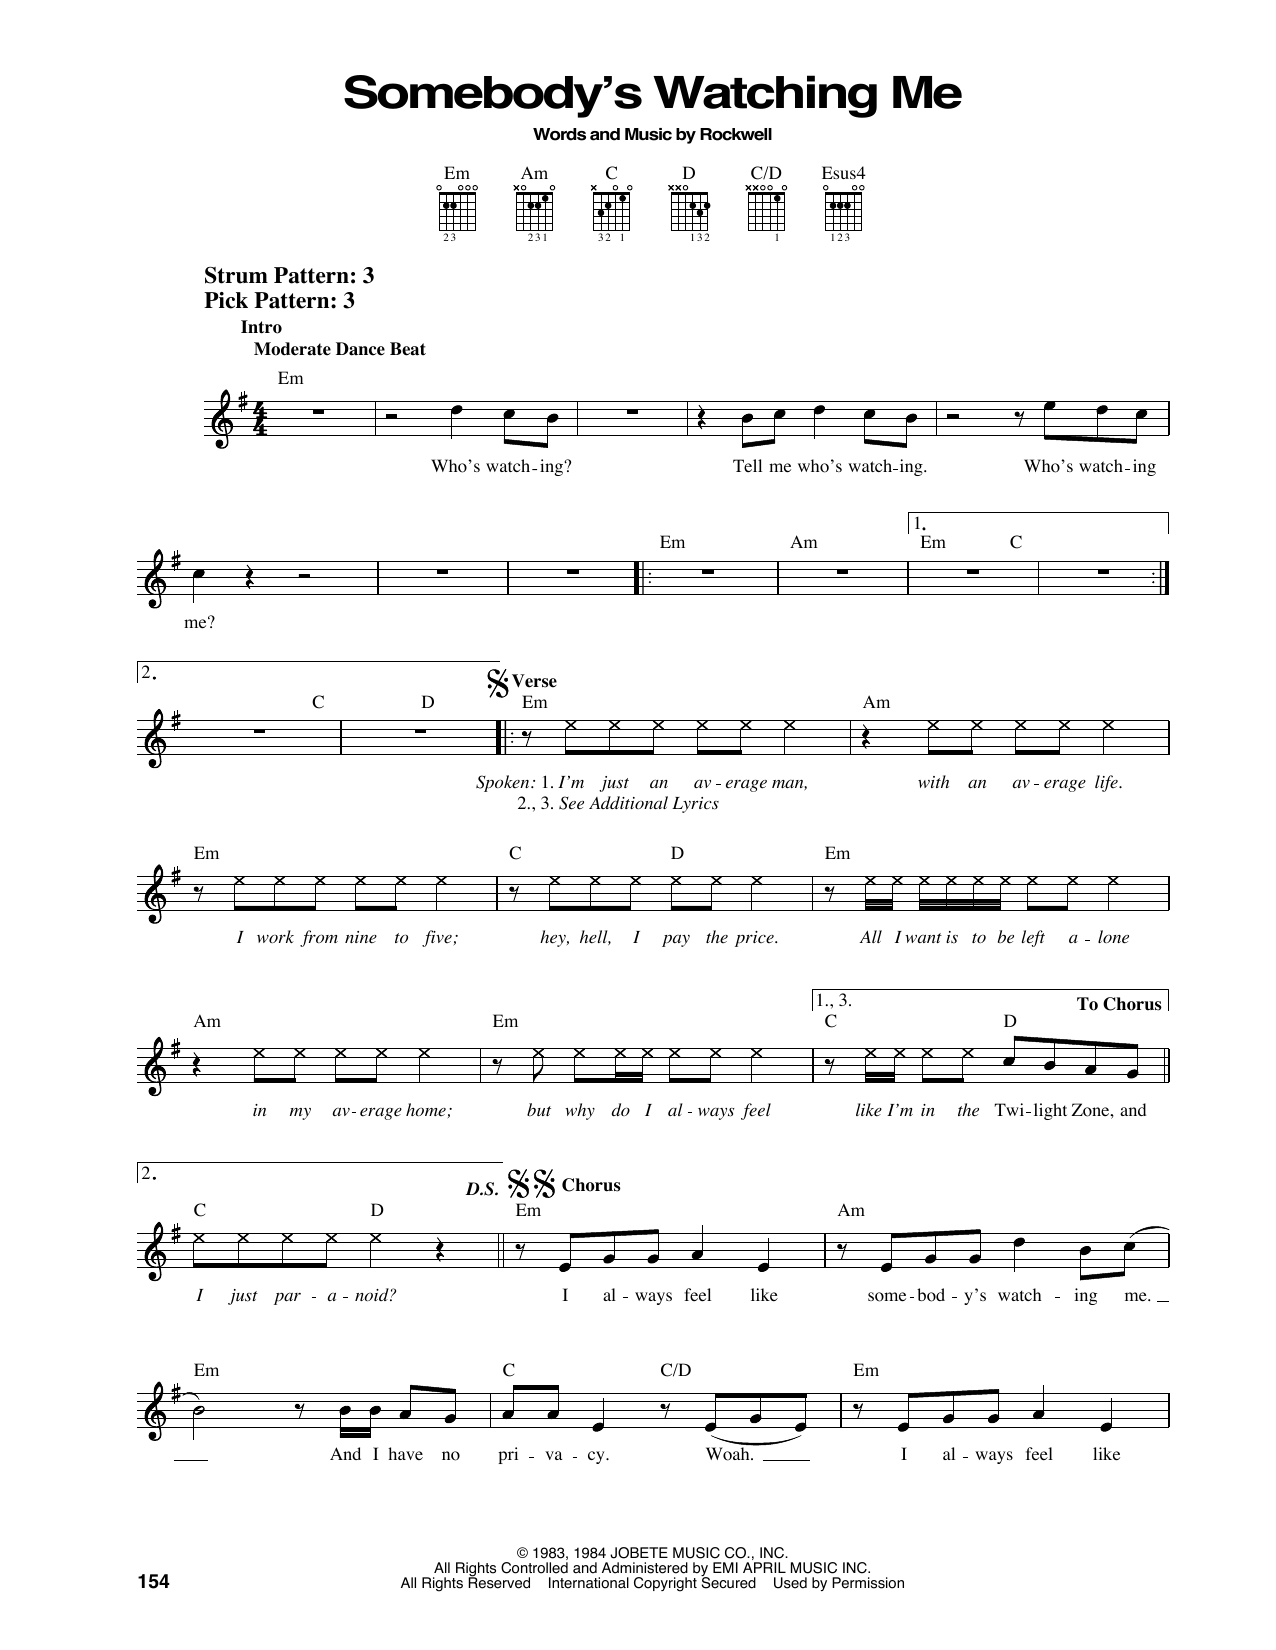 Download Rockwell Somebody's Watching Me Sheet Music